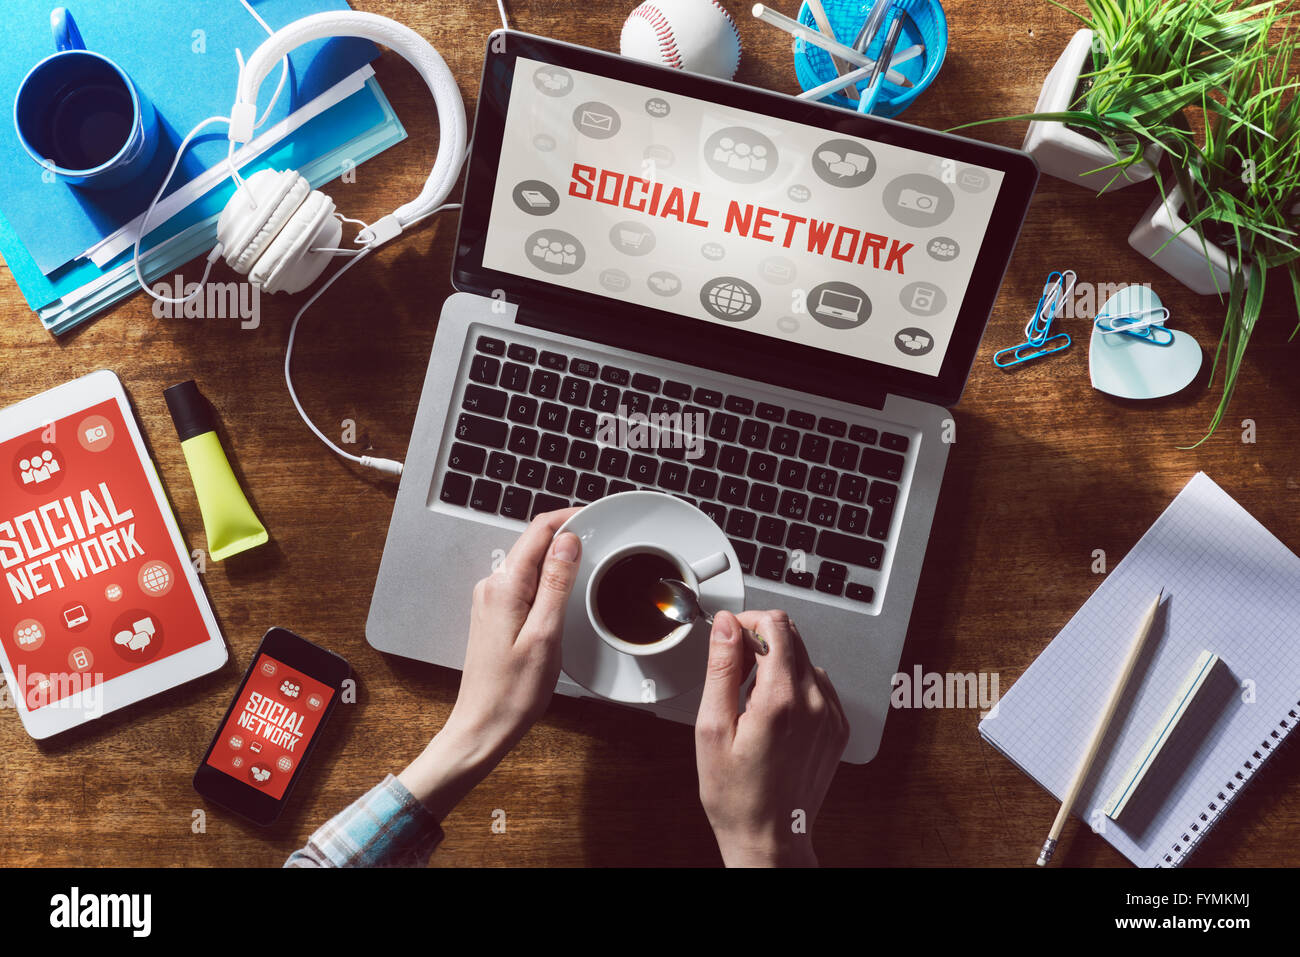 Social network website mock up on computer screen, tablet and smartphone with hands holding a cup of coffee Stock Photo